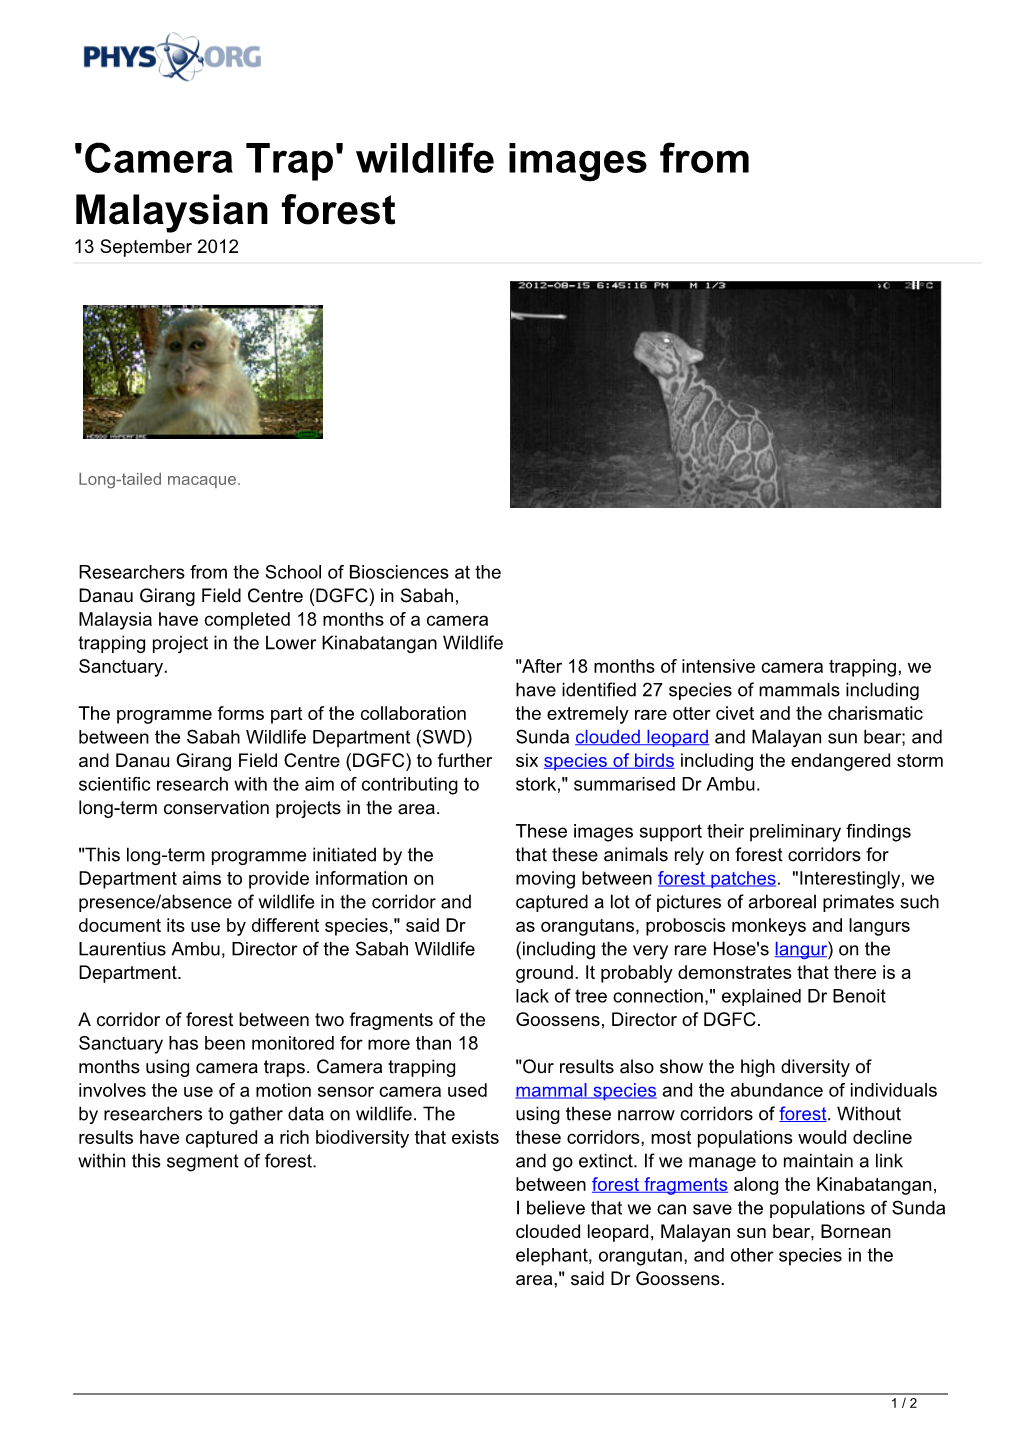 'Camera Trap' Wildlife Images from Malaysian Forest 13 September 2012